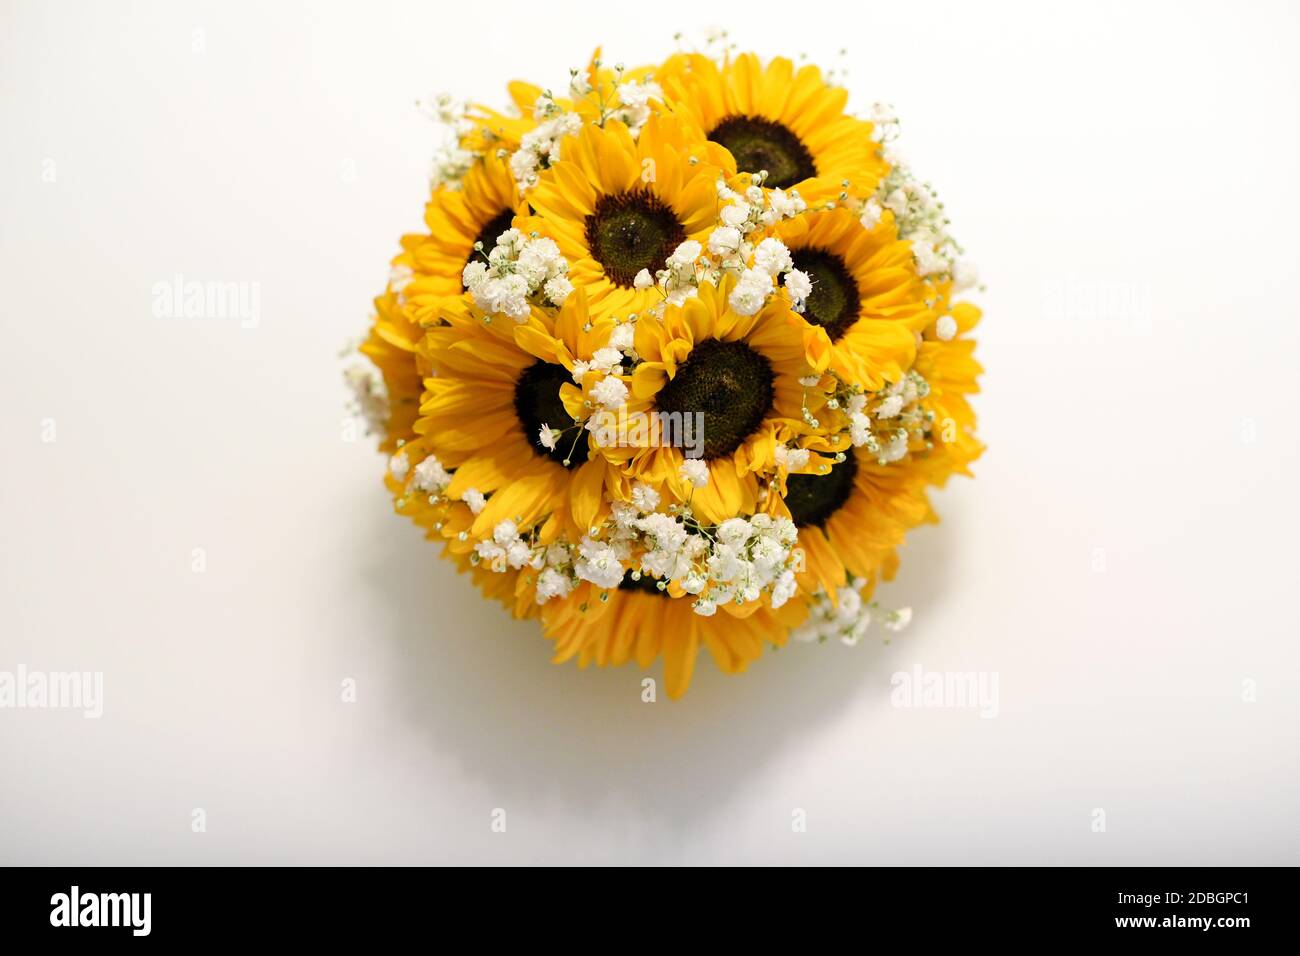 Round posy of colorful yellow sunflowers interspersed with dainty white blossom viewed top down on white with copyspace Stock Photo